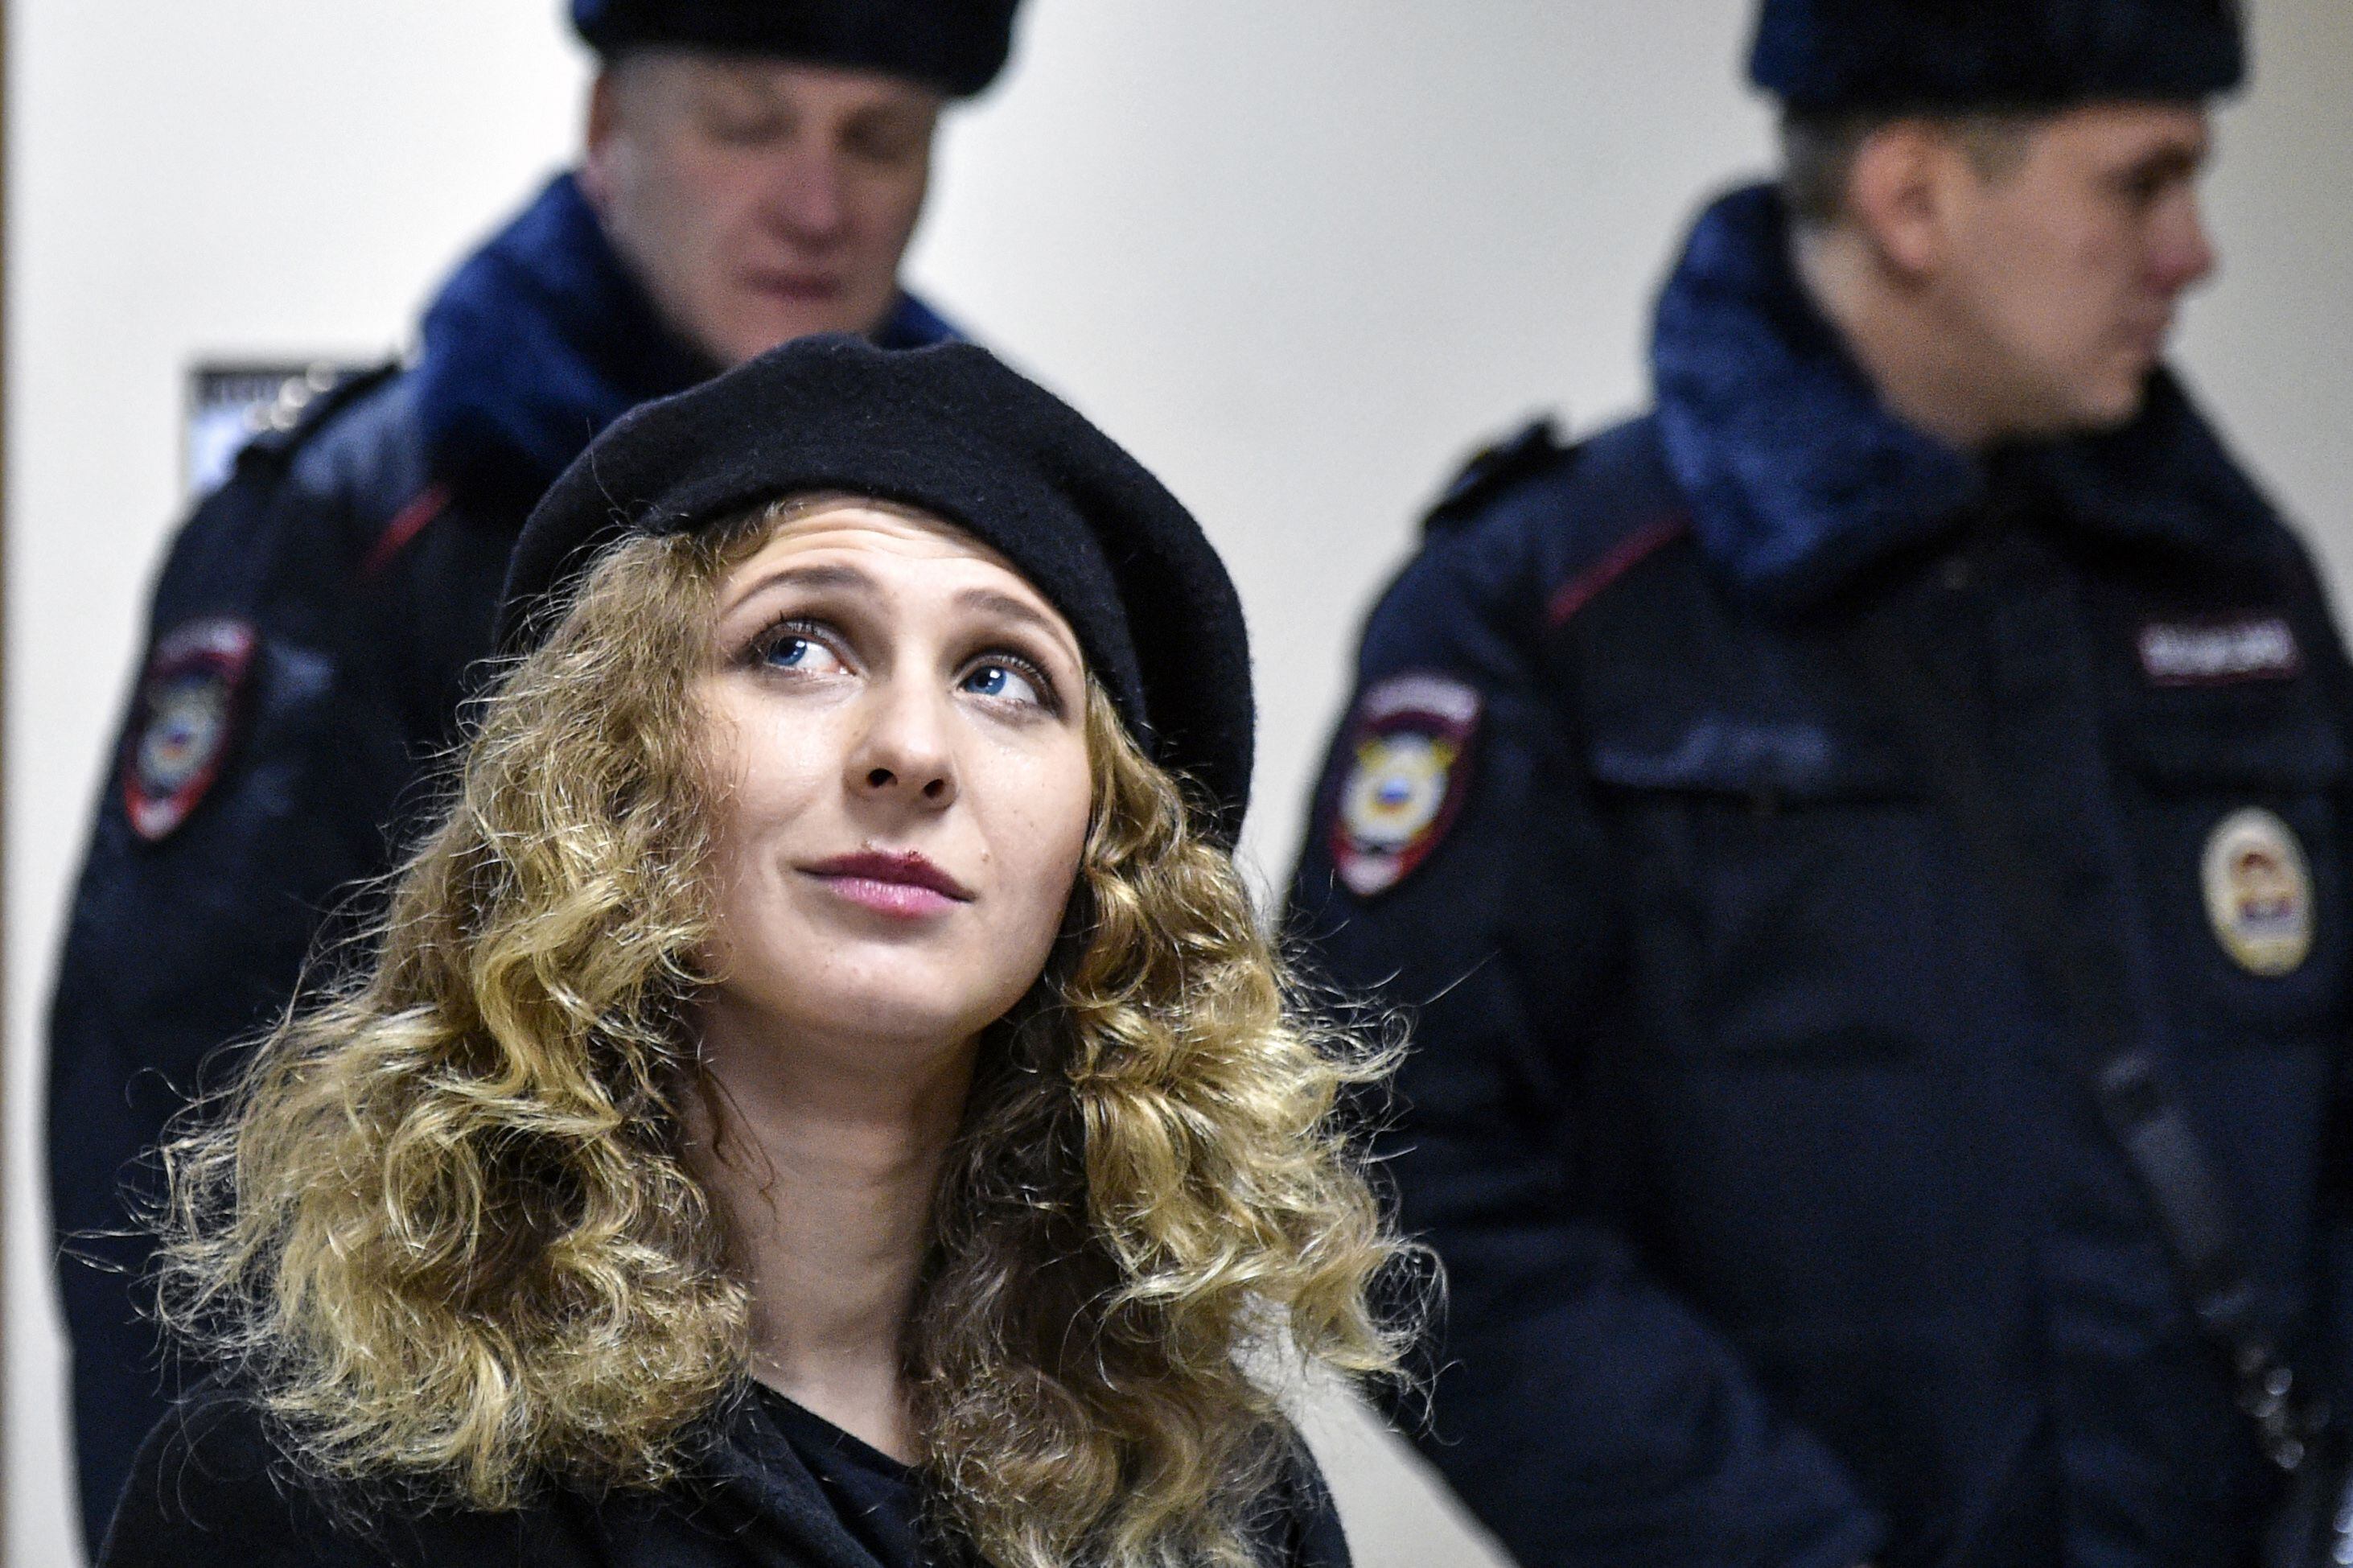 In 2012, Maria Alyokhina was sent to a prison in the Ural Mountains, thousands of kilometers away from her home, as punishment for speaking out against the Orthodox Church and Vladimir Putin.